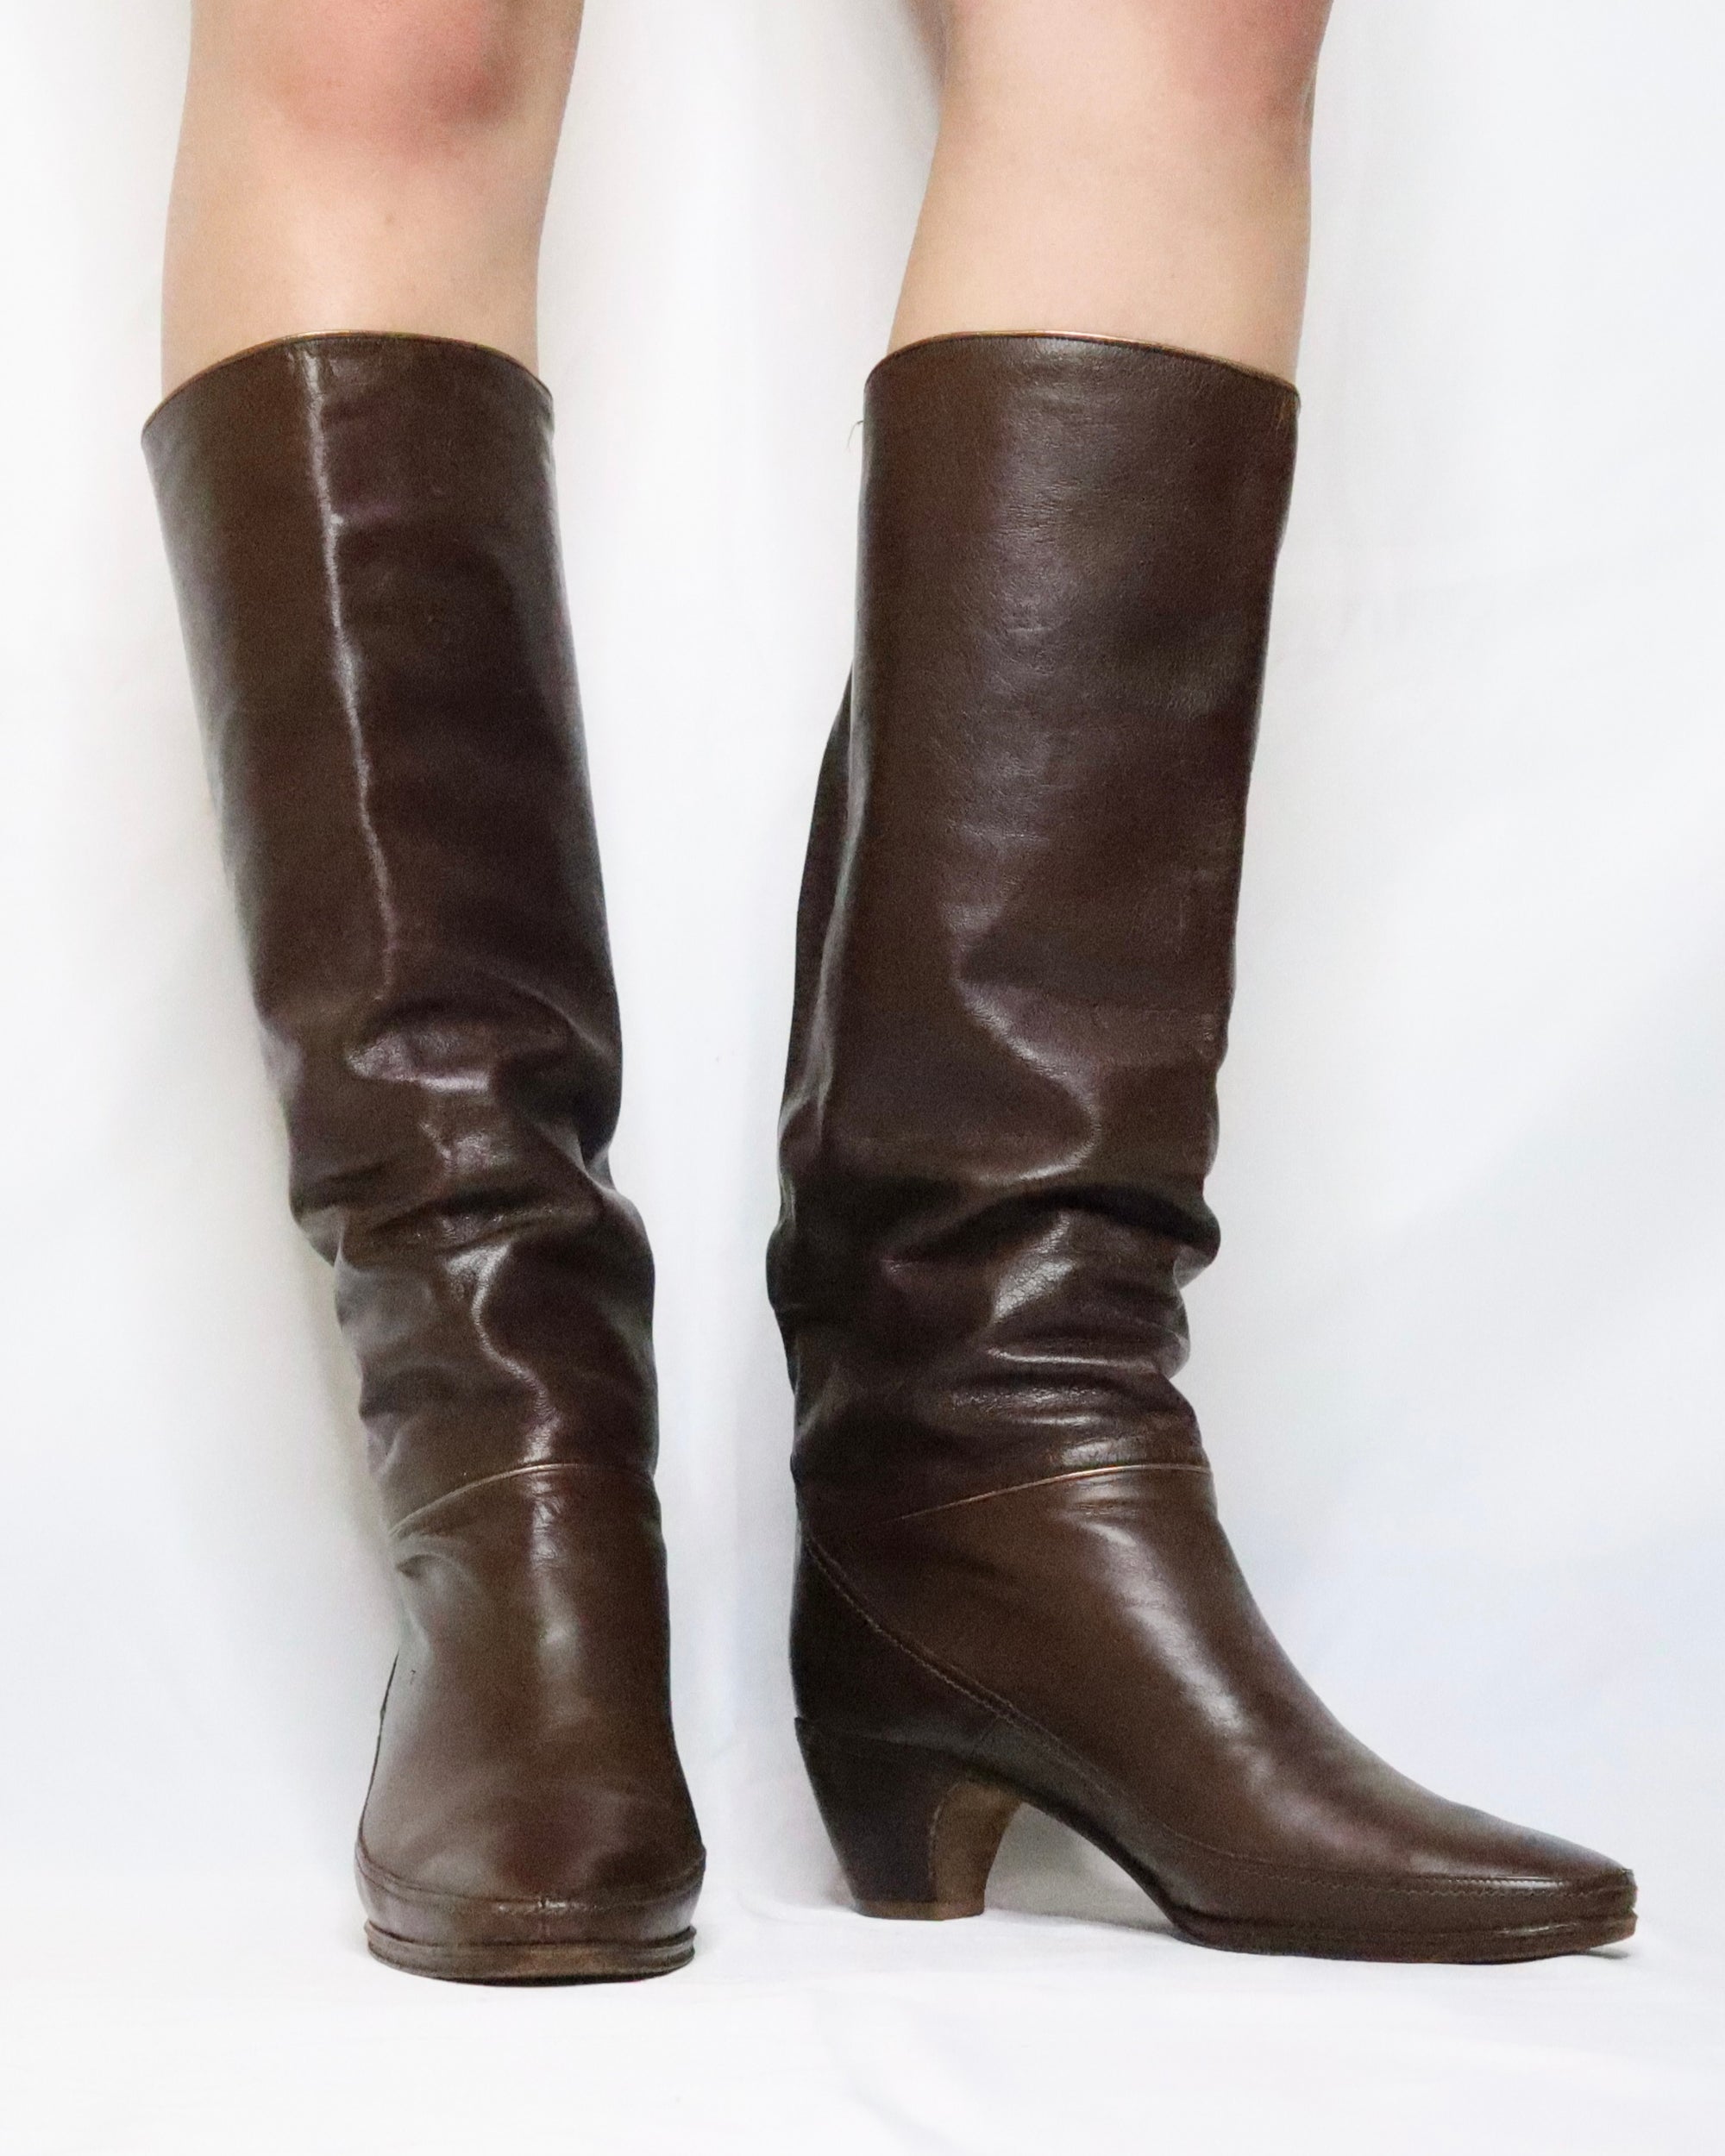 Slouchy Leather Riding Boots (6 US/36.5 EU)